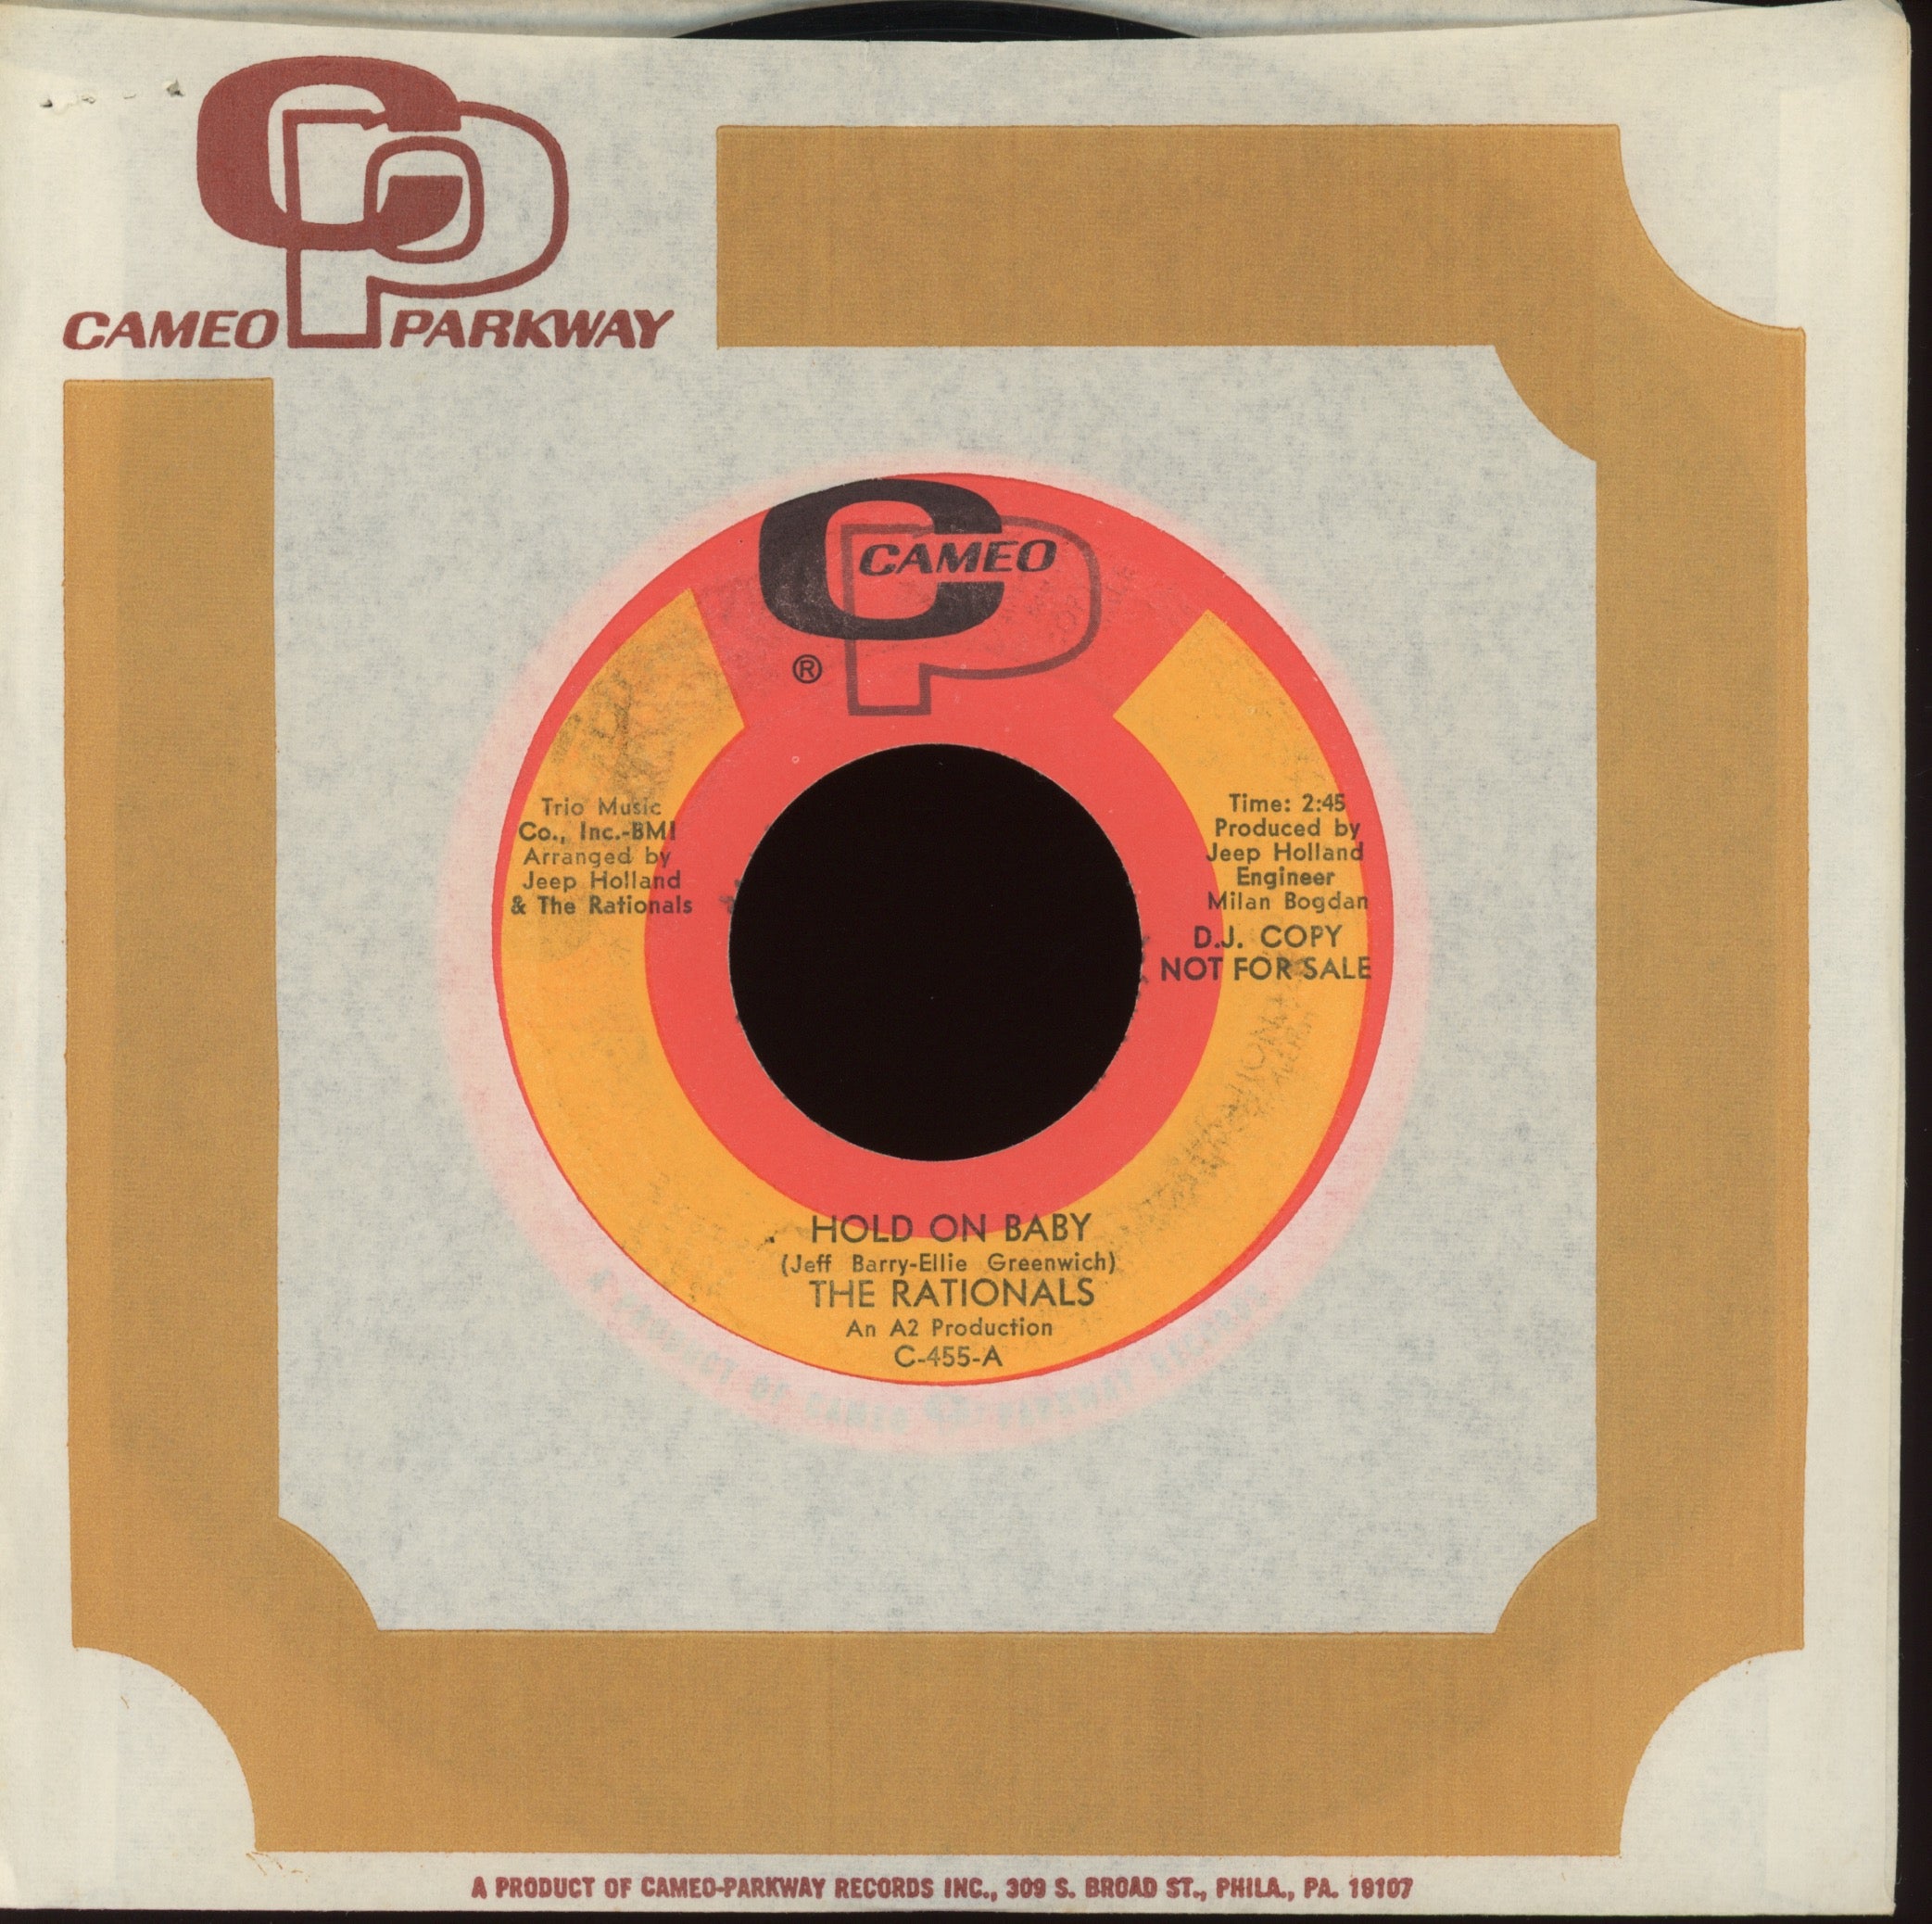 The Rationals - Hold On Baby on Cameo Parkway Promo Garage 45